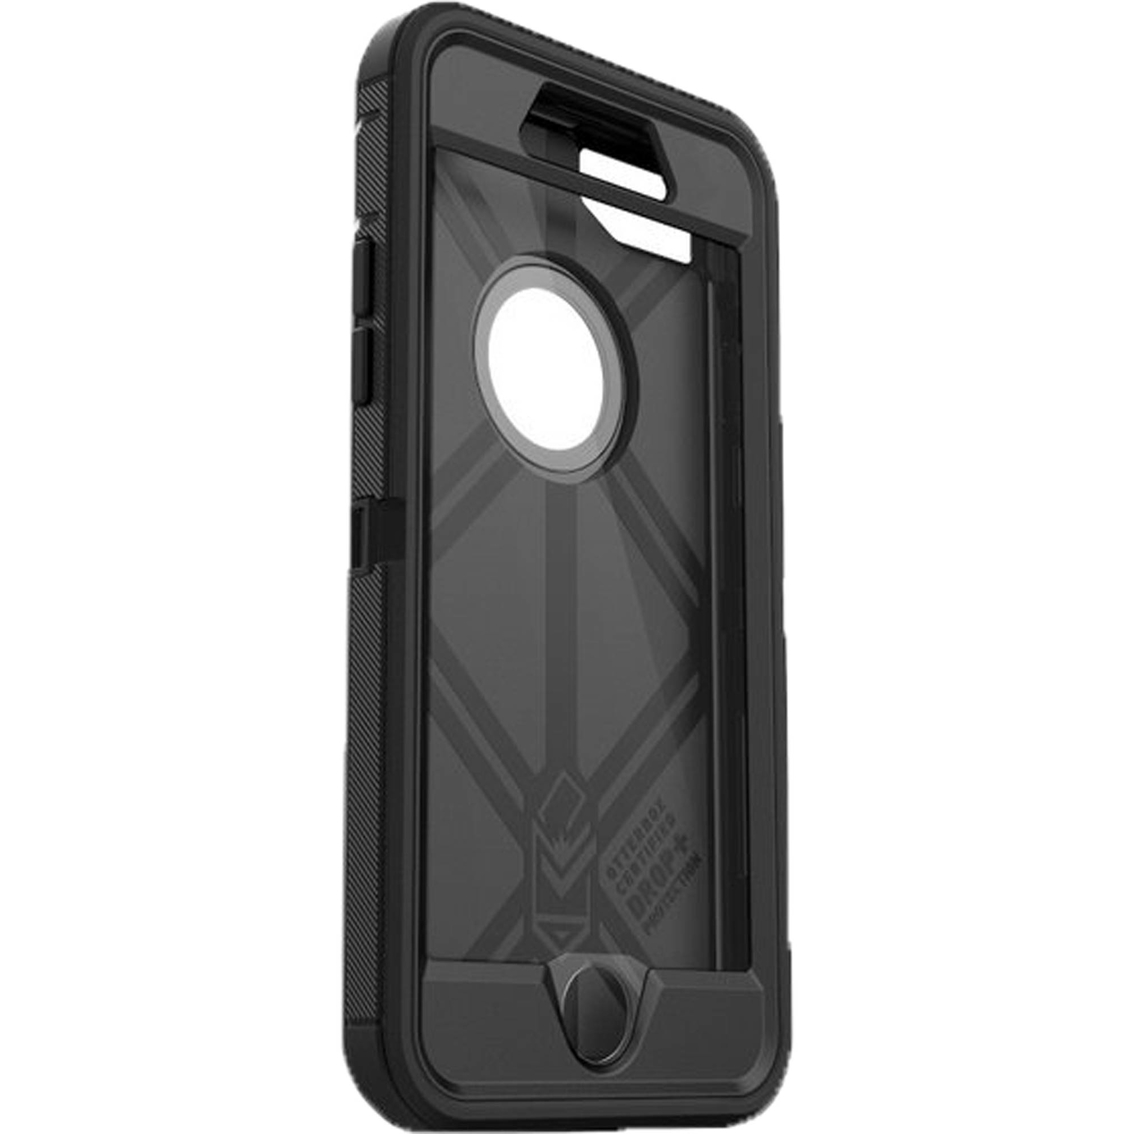 Nite Ize Ob Defender Case For Apple Iphone 7 / 8 | Cell Phone Cases ...